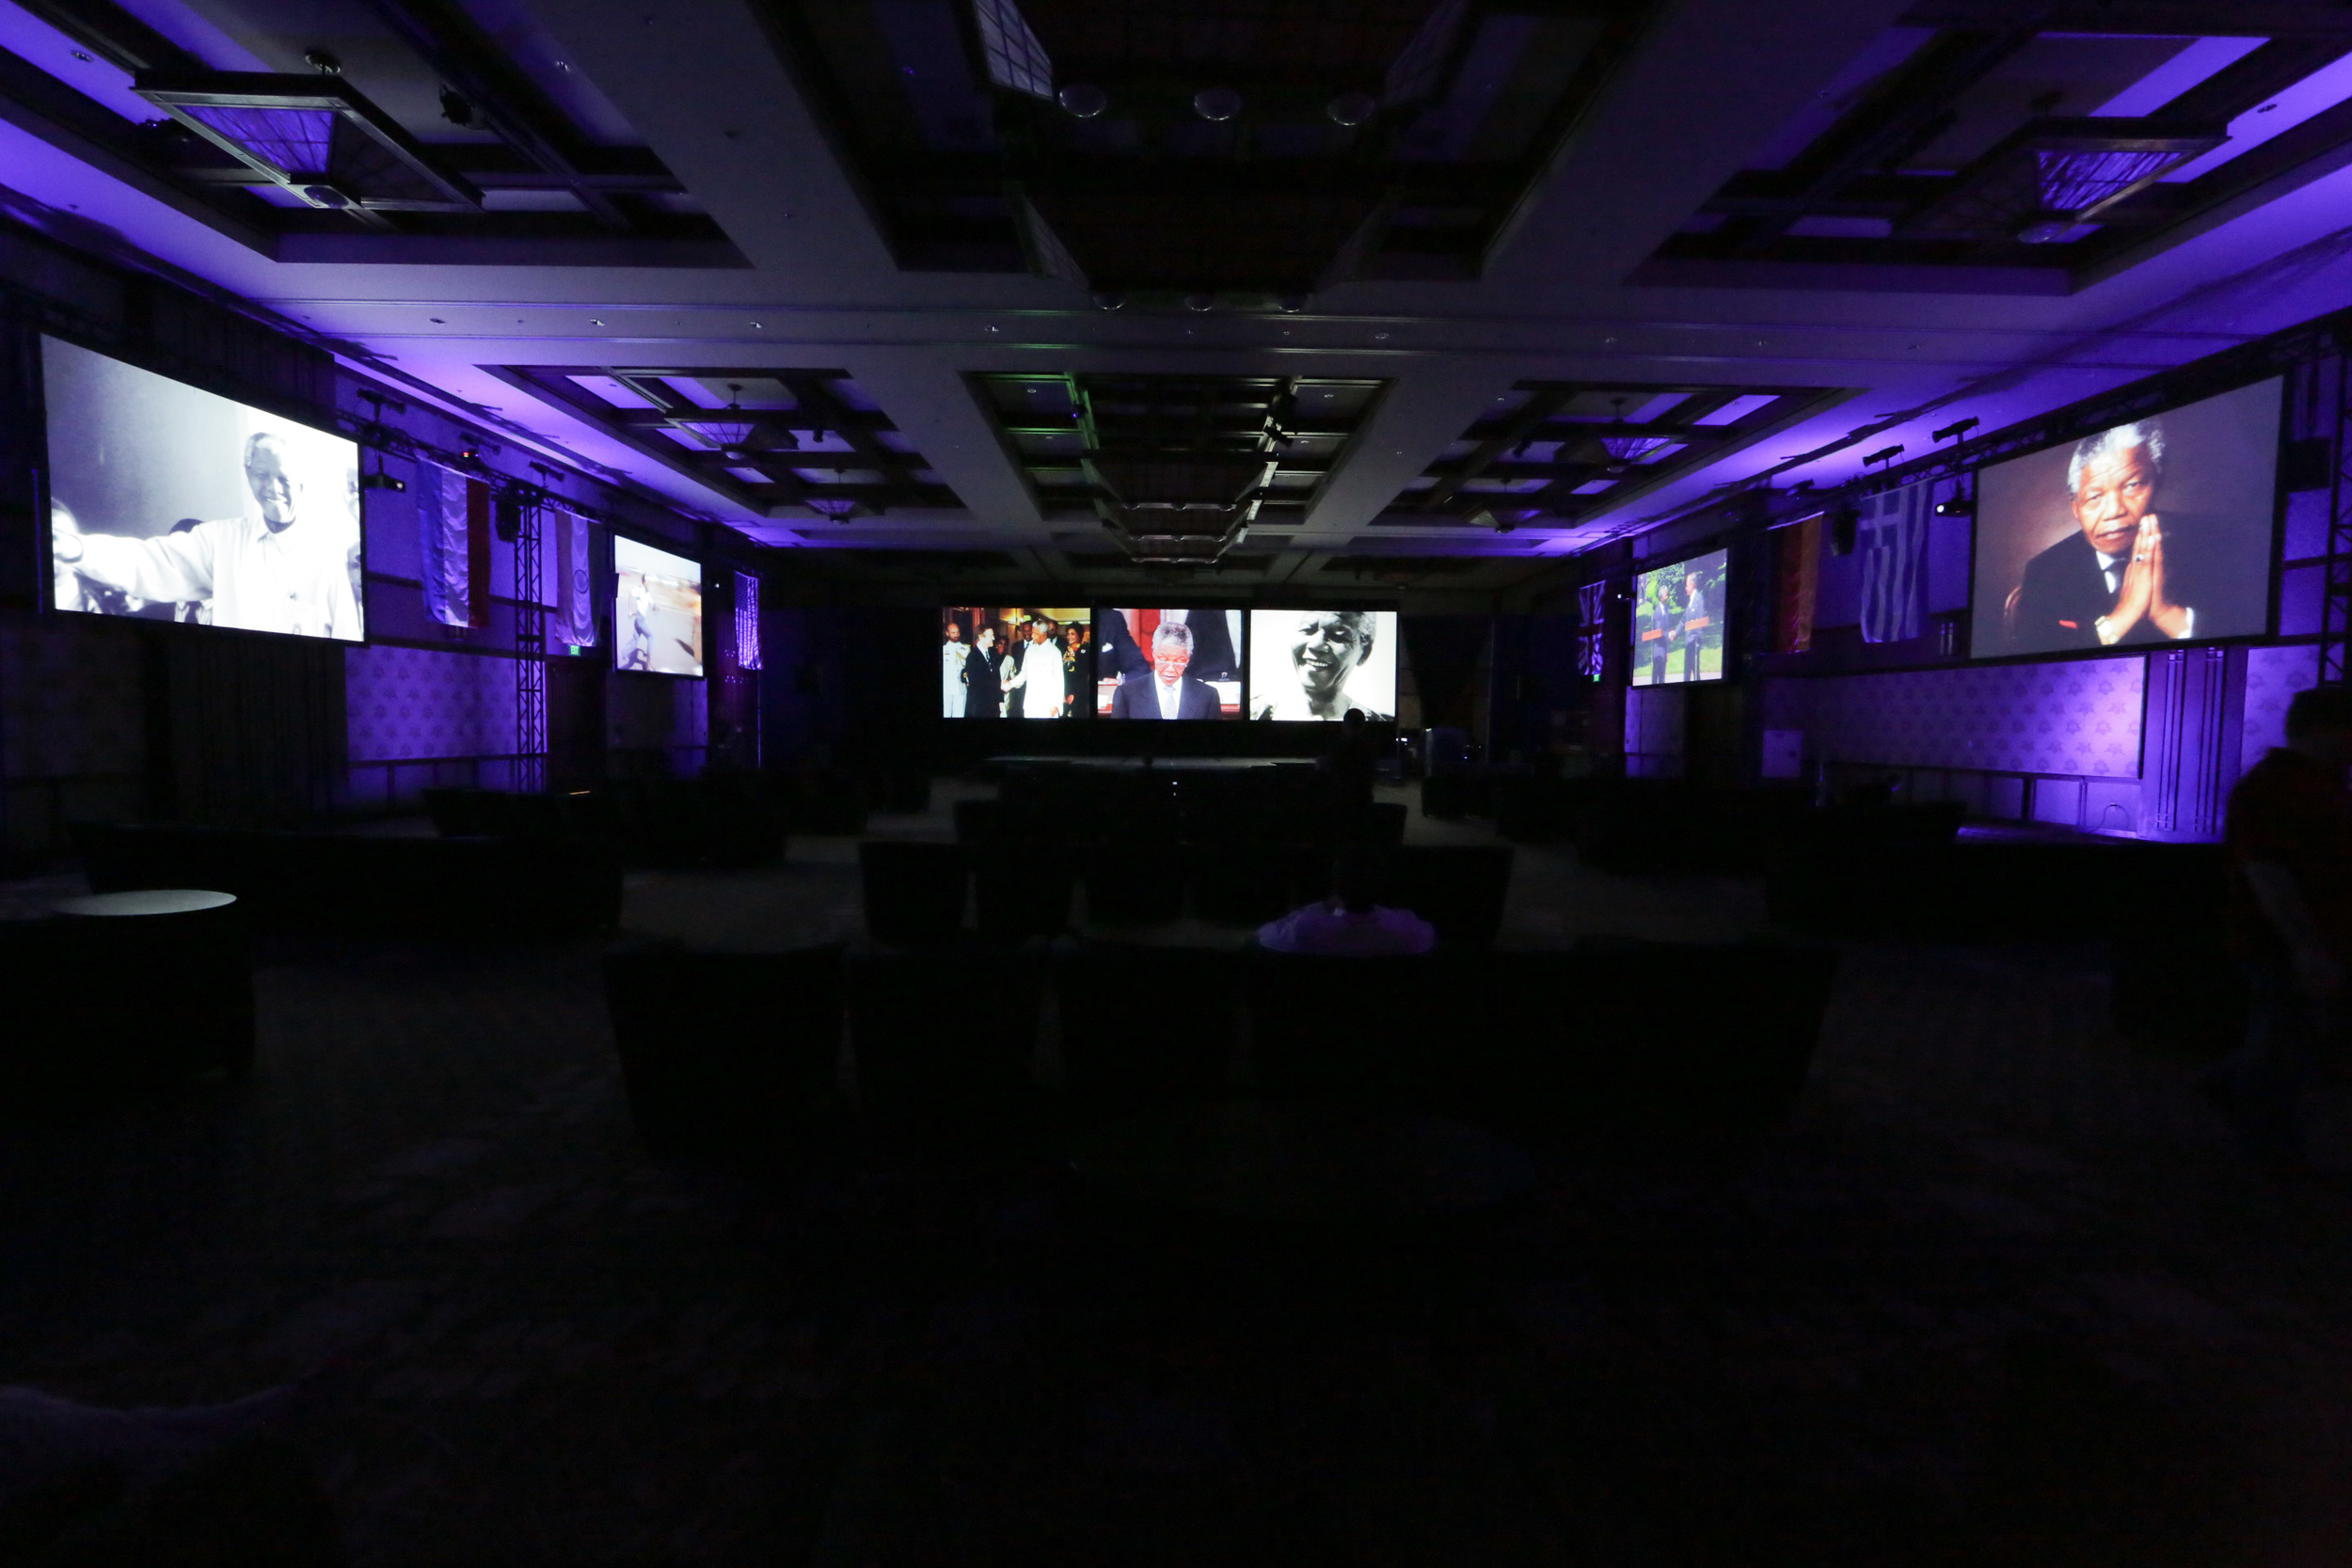 A view of how Tri-Marq set up the Disneyland Grand Californian ballroom for a recent event. There are projector screens lining each side wall and a large screen in the front of the house with uplighting on both sides.